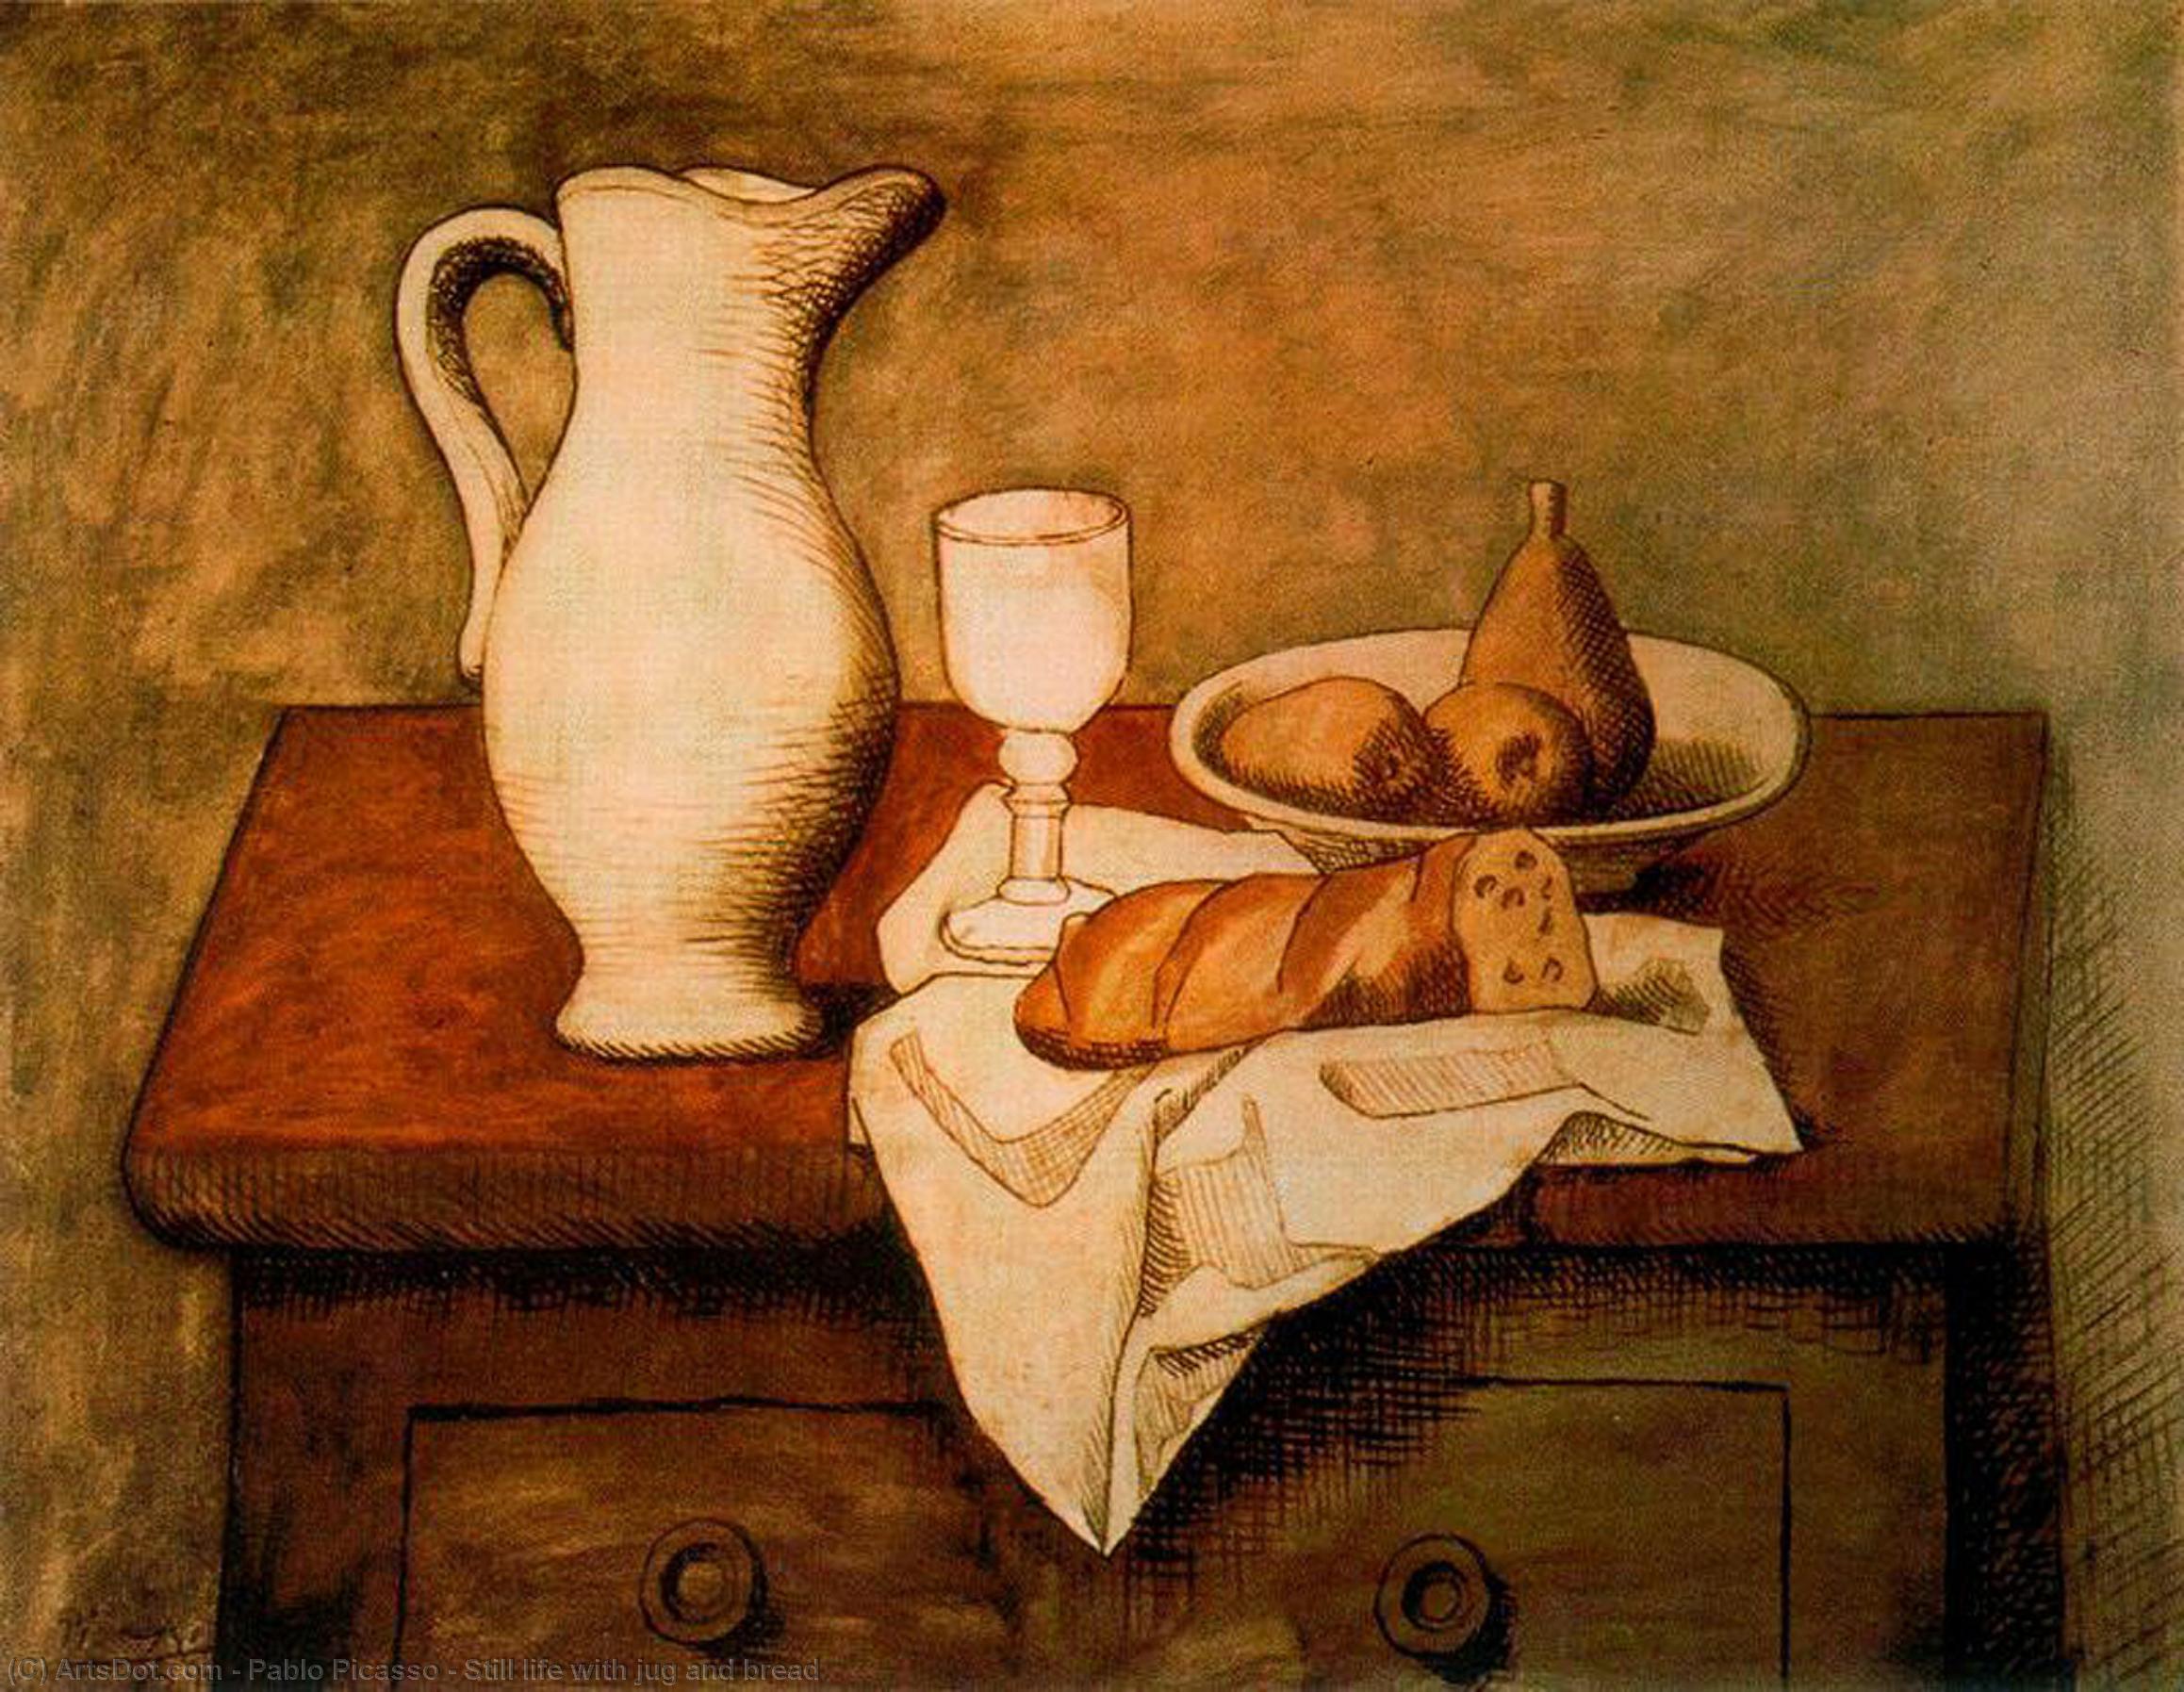 WikiOO.org - Encyclopedia of Fine Arts - Maleri, Artwork Pablo Picasso - Still life with jug and bread